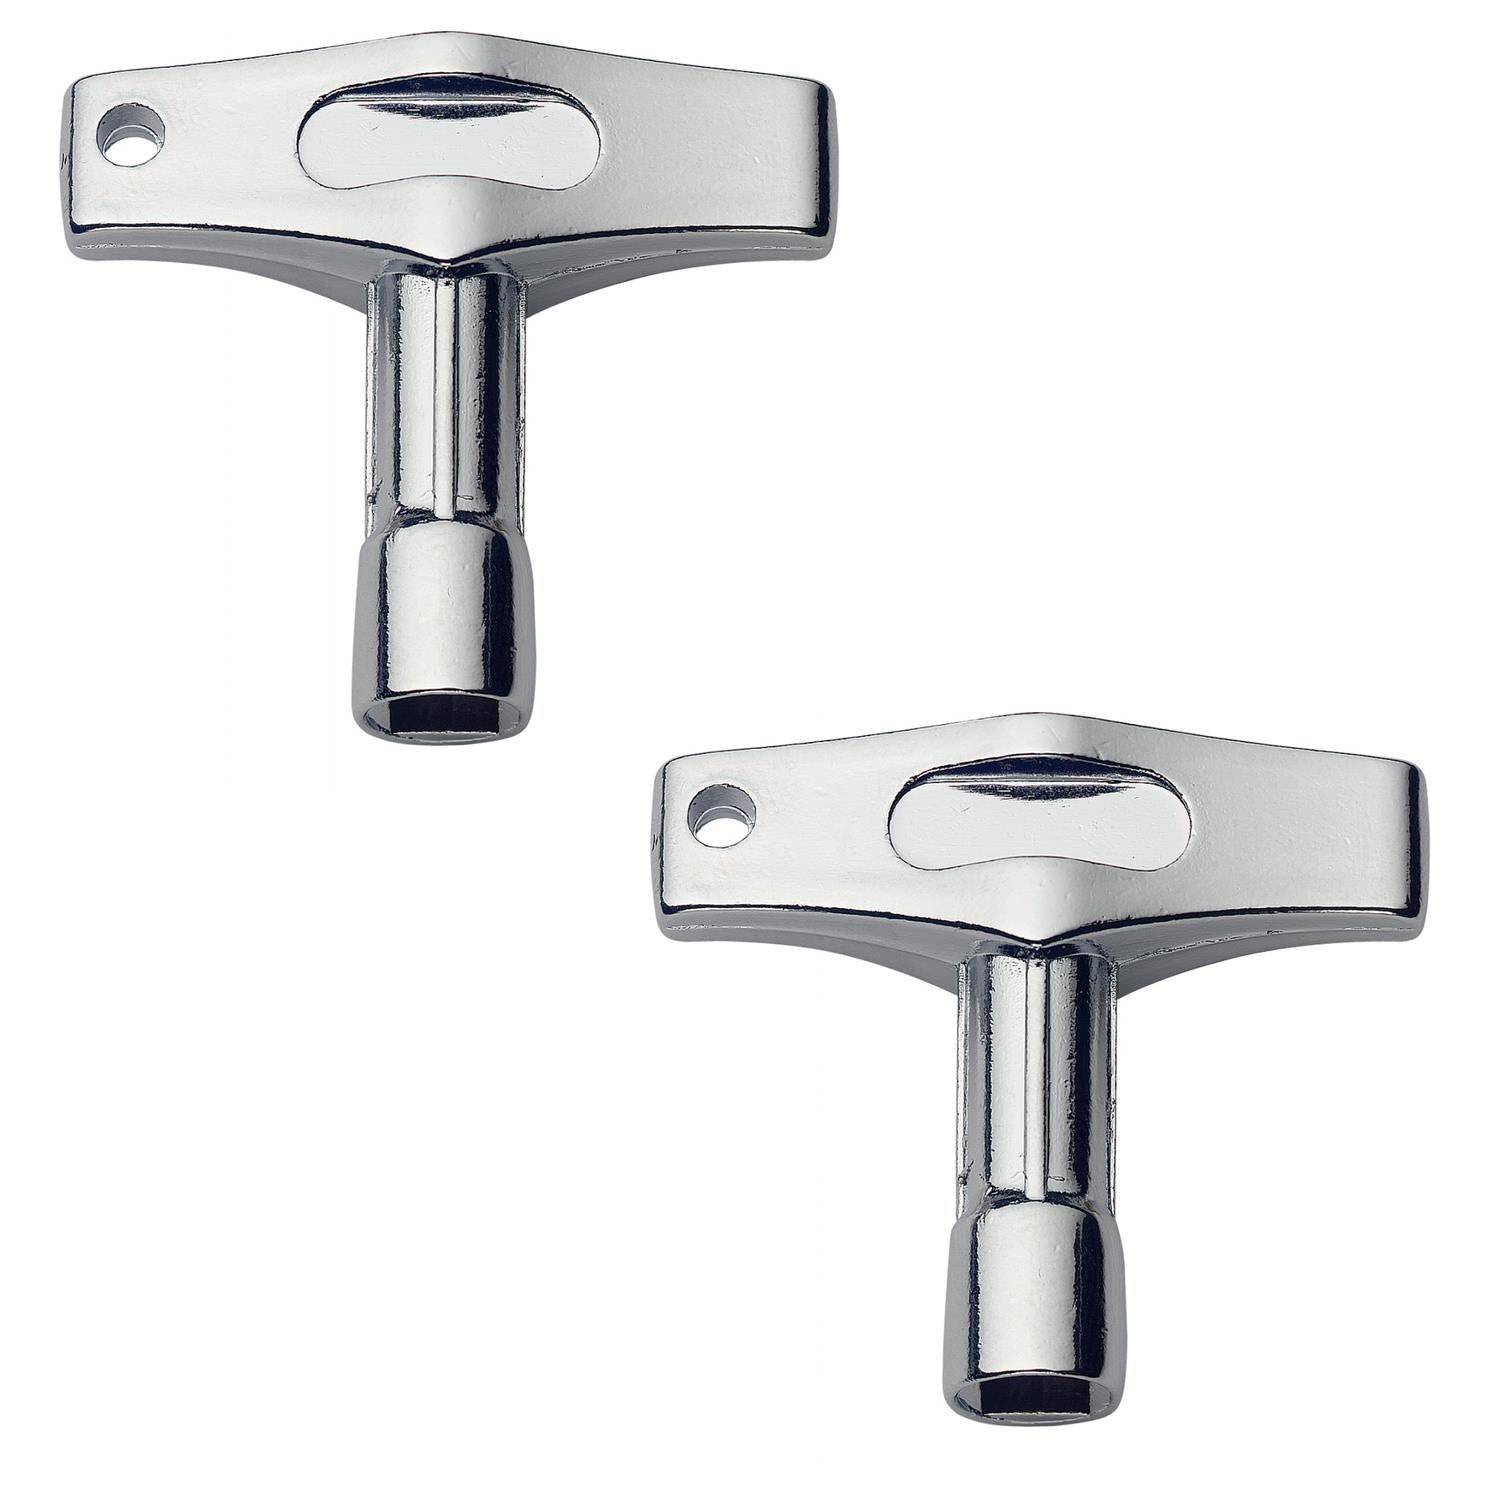 2 x Stagg K-60 Drum Tuning Key - DY Pro Audio